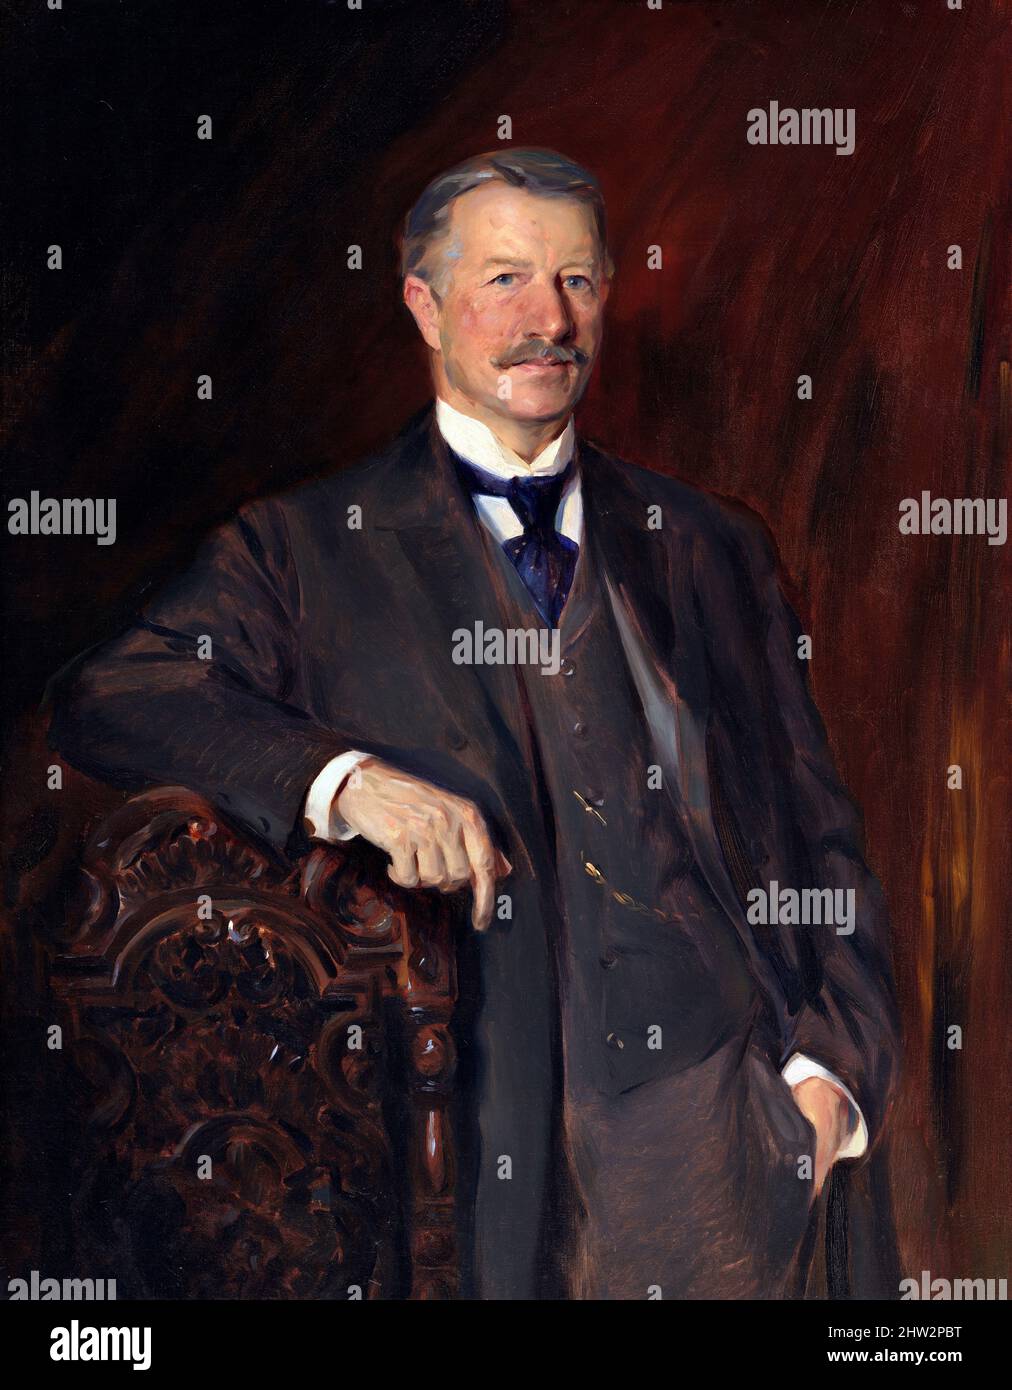 Portrait of the American banker and philanthropist, Charles Carroll Glover (1846-1936) by John McLure Hamilton, oil on canvas, c. 1900. Stock Photo